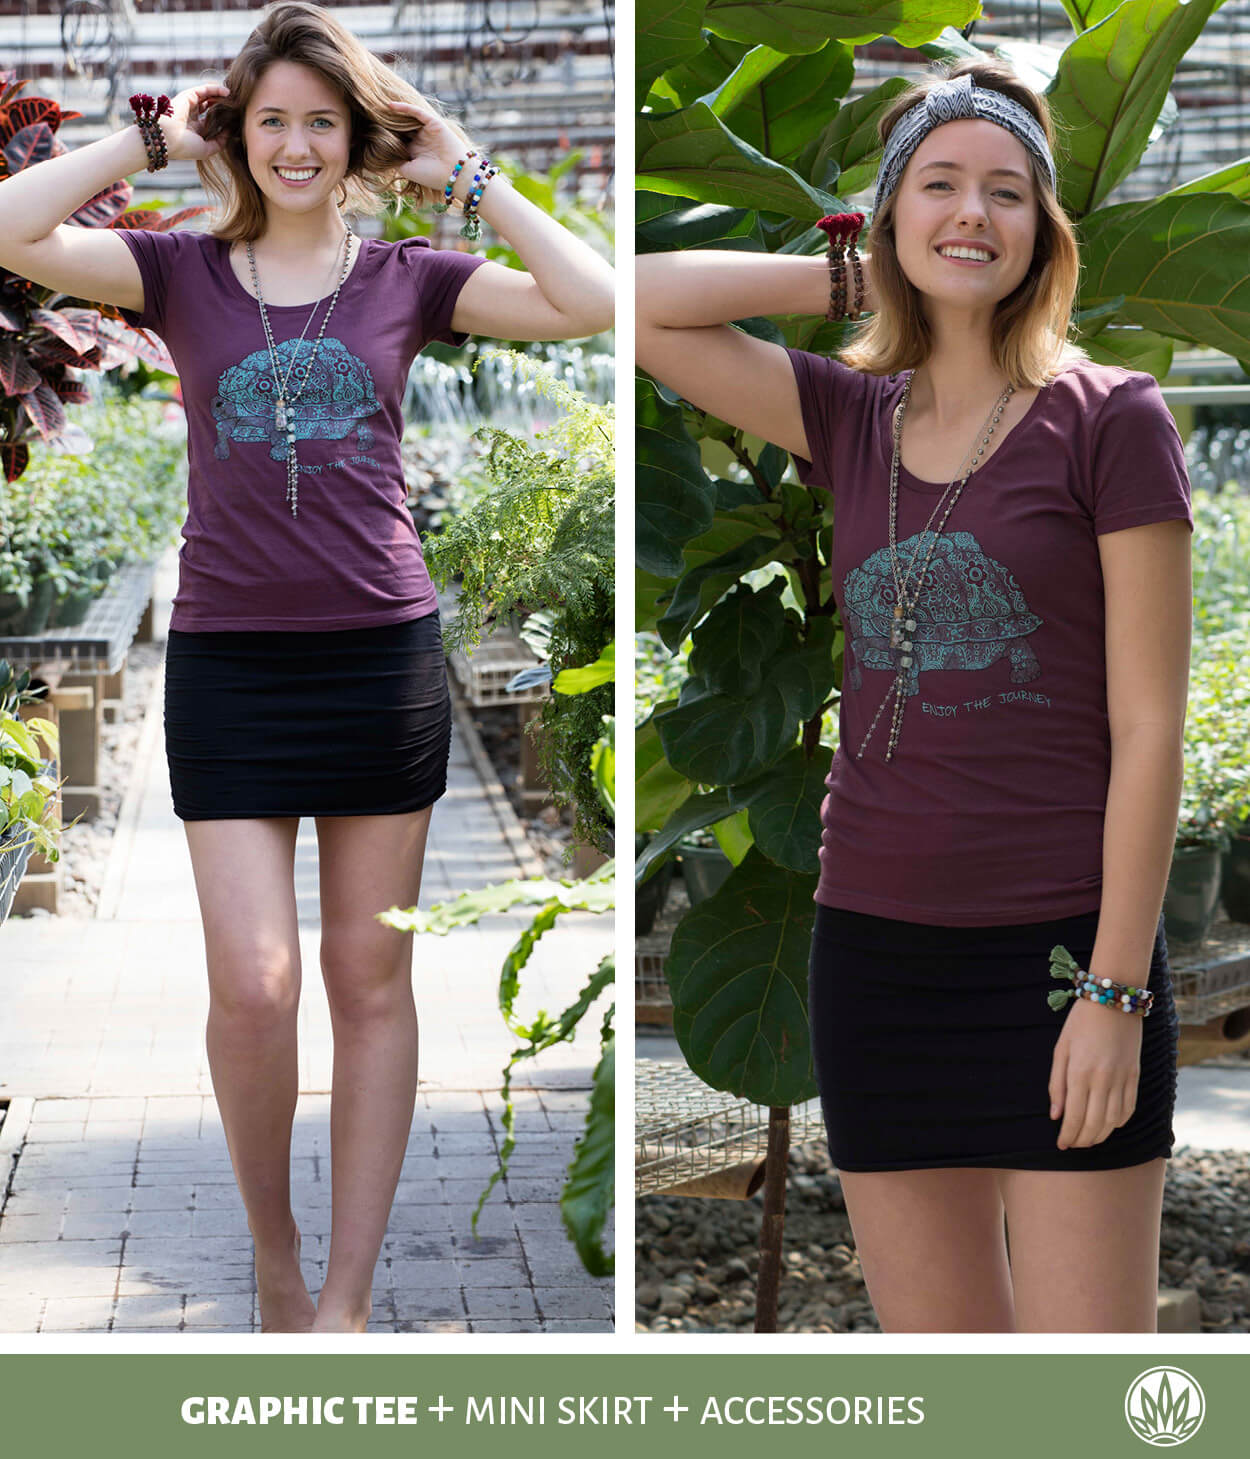 how to wear graphic tees summer b - Graphic Tee Outfits: summer edition